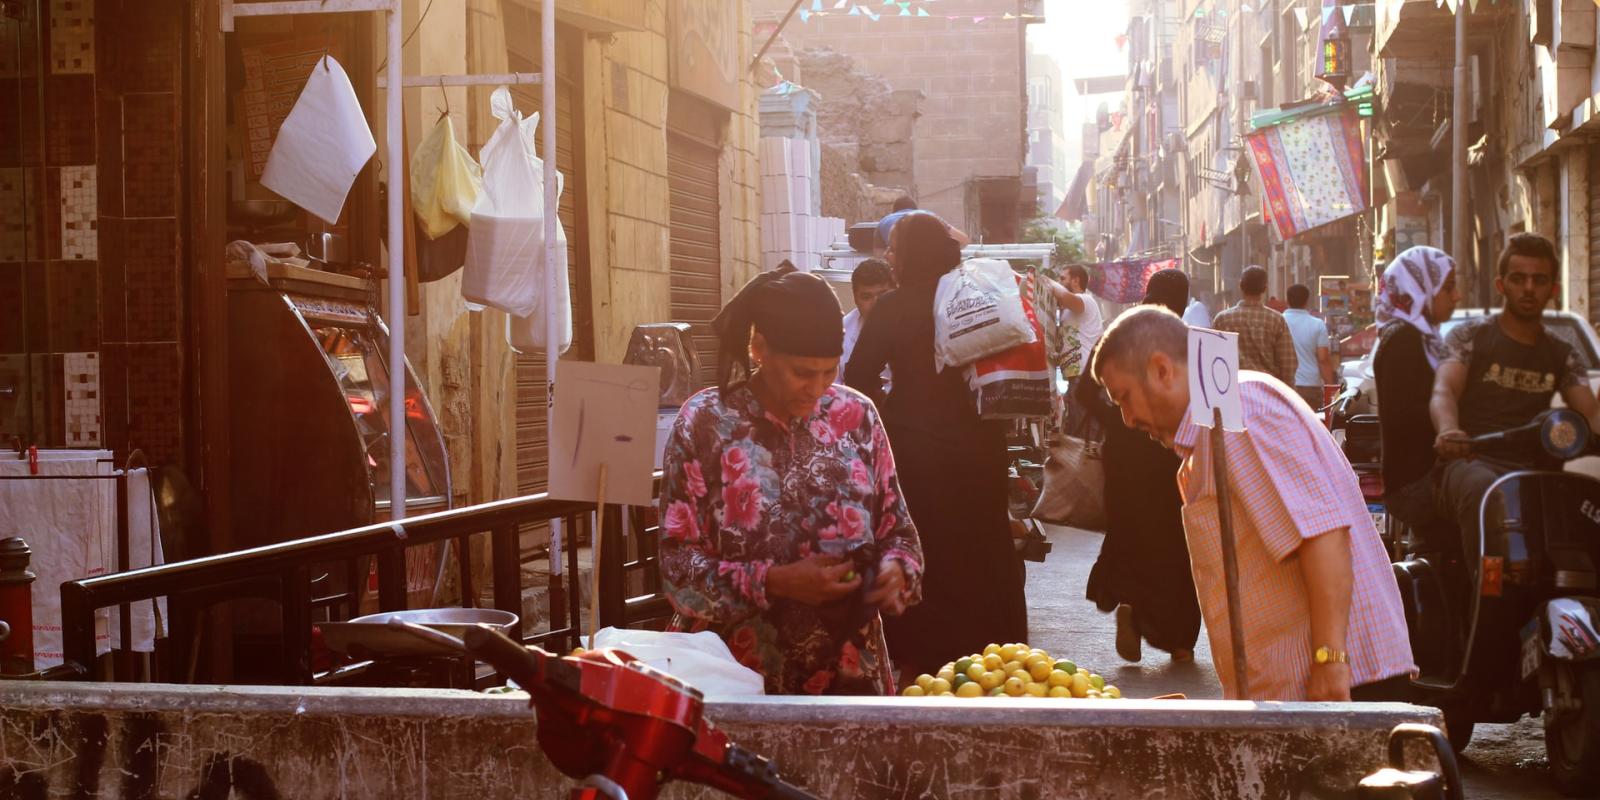 Photo of a Woman Selling Lemons in Cairo